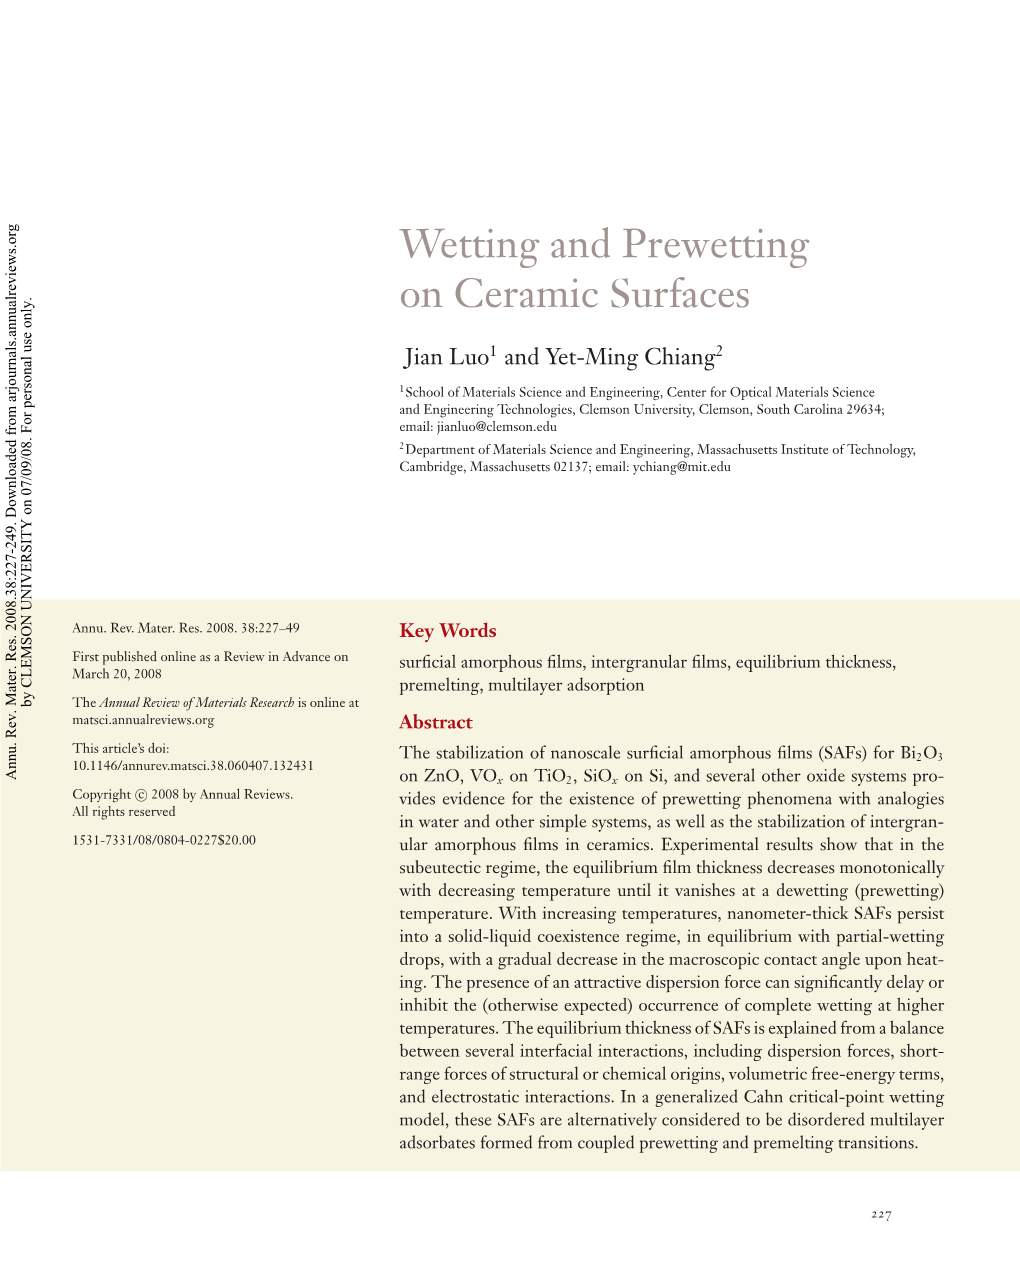 Wetting and Prewetting on Ceramic Surfaces